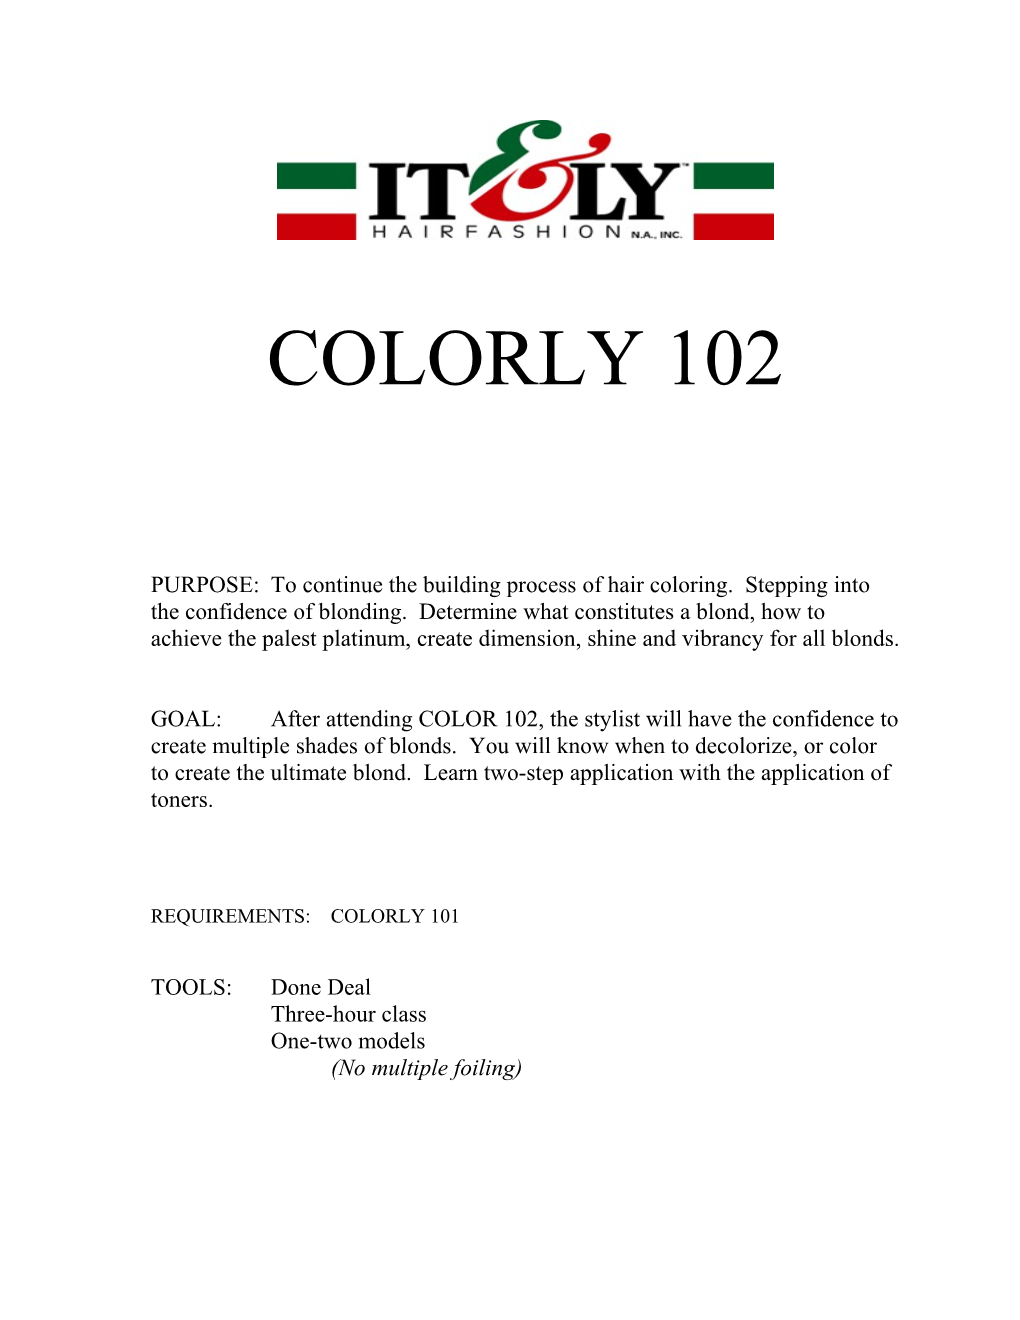 COLORLY 102 PURPOSE: to Continue the Building Process of Hair Coloring. Stepping Into